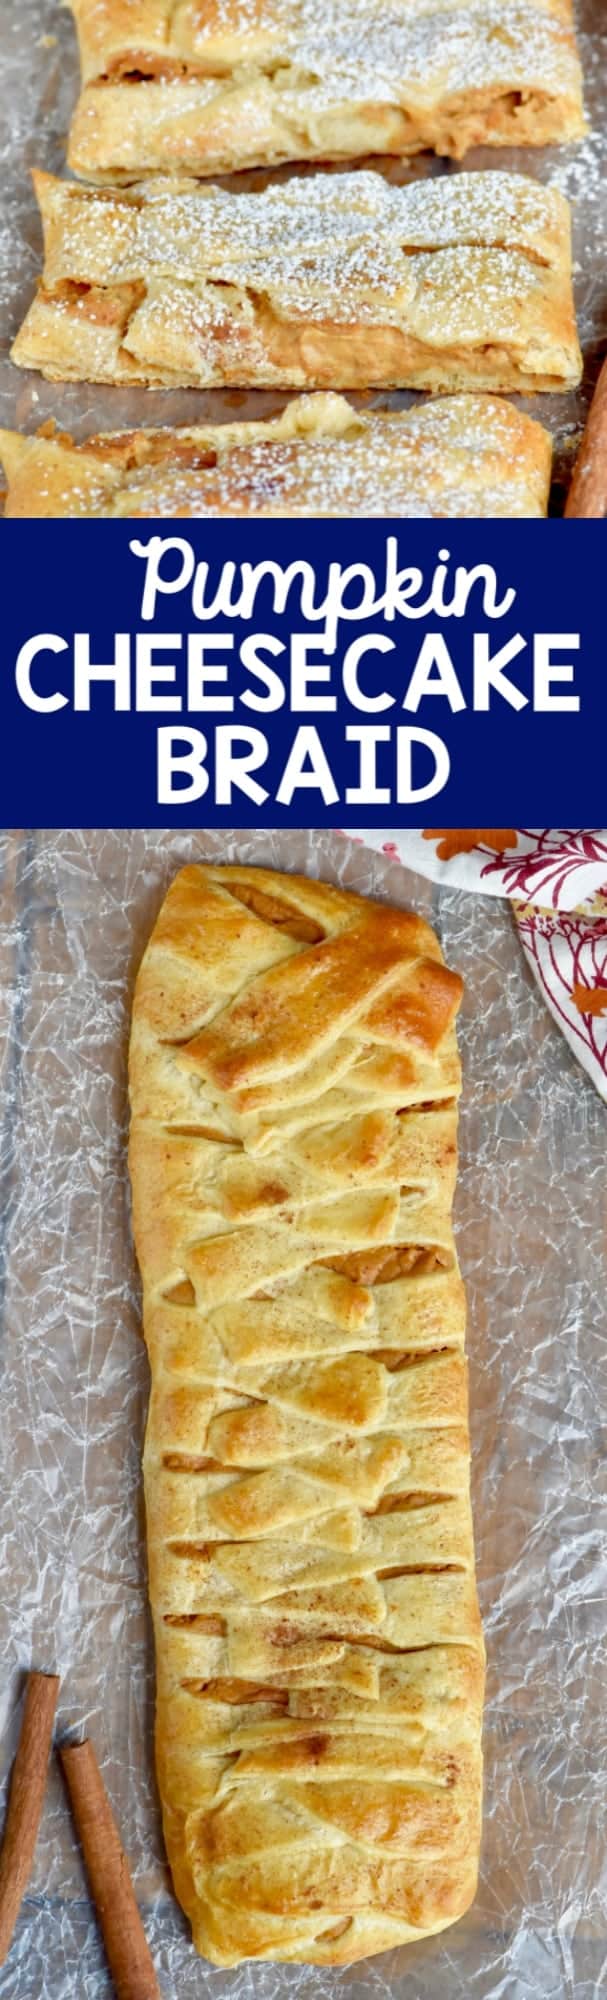 The Pumpkin Cheesecake Braid has a hard golden brown exterior and dusted with powdered sugar. 